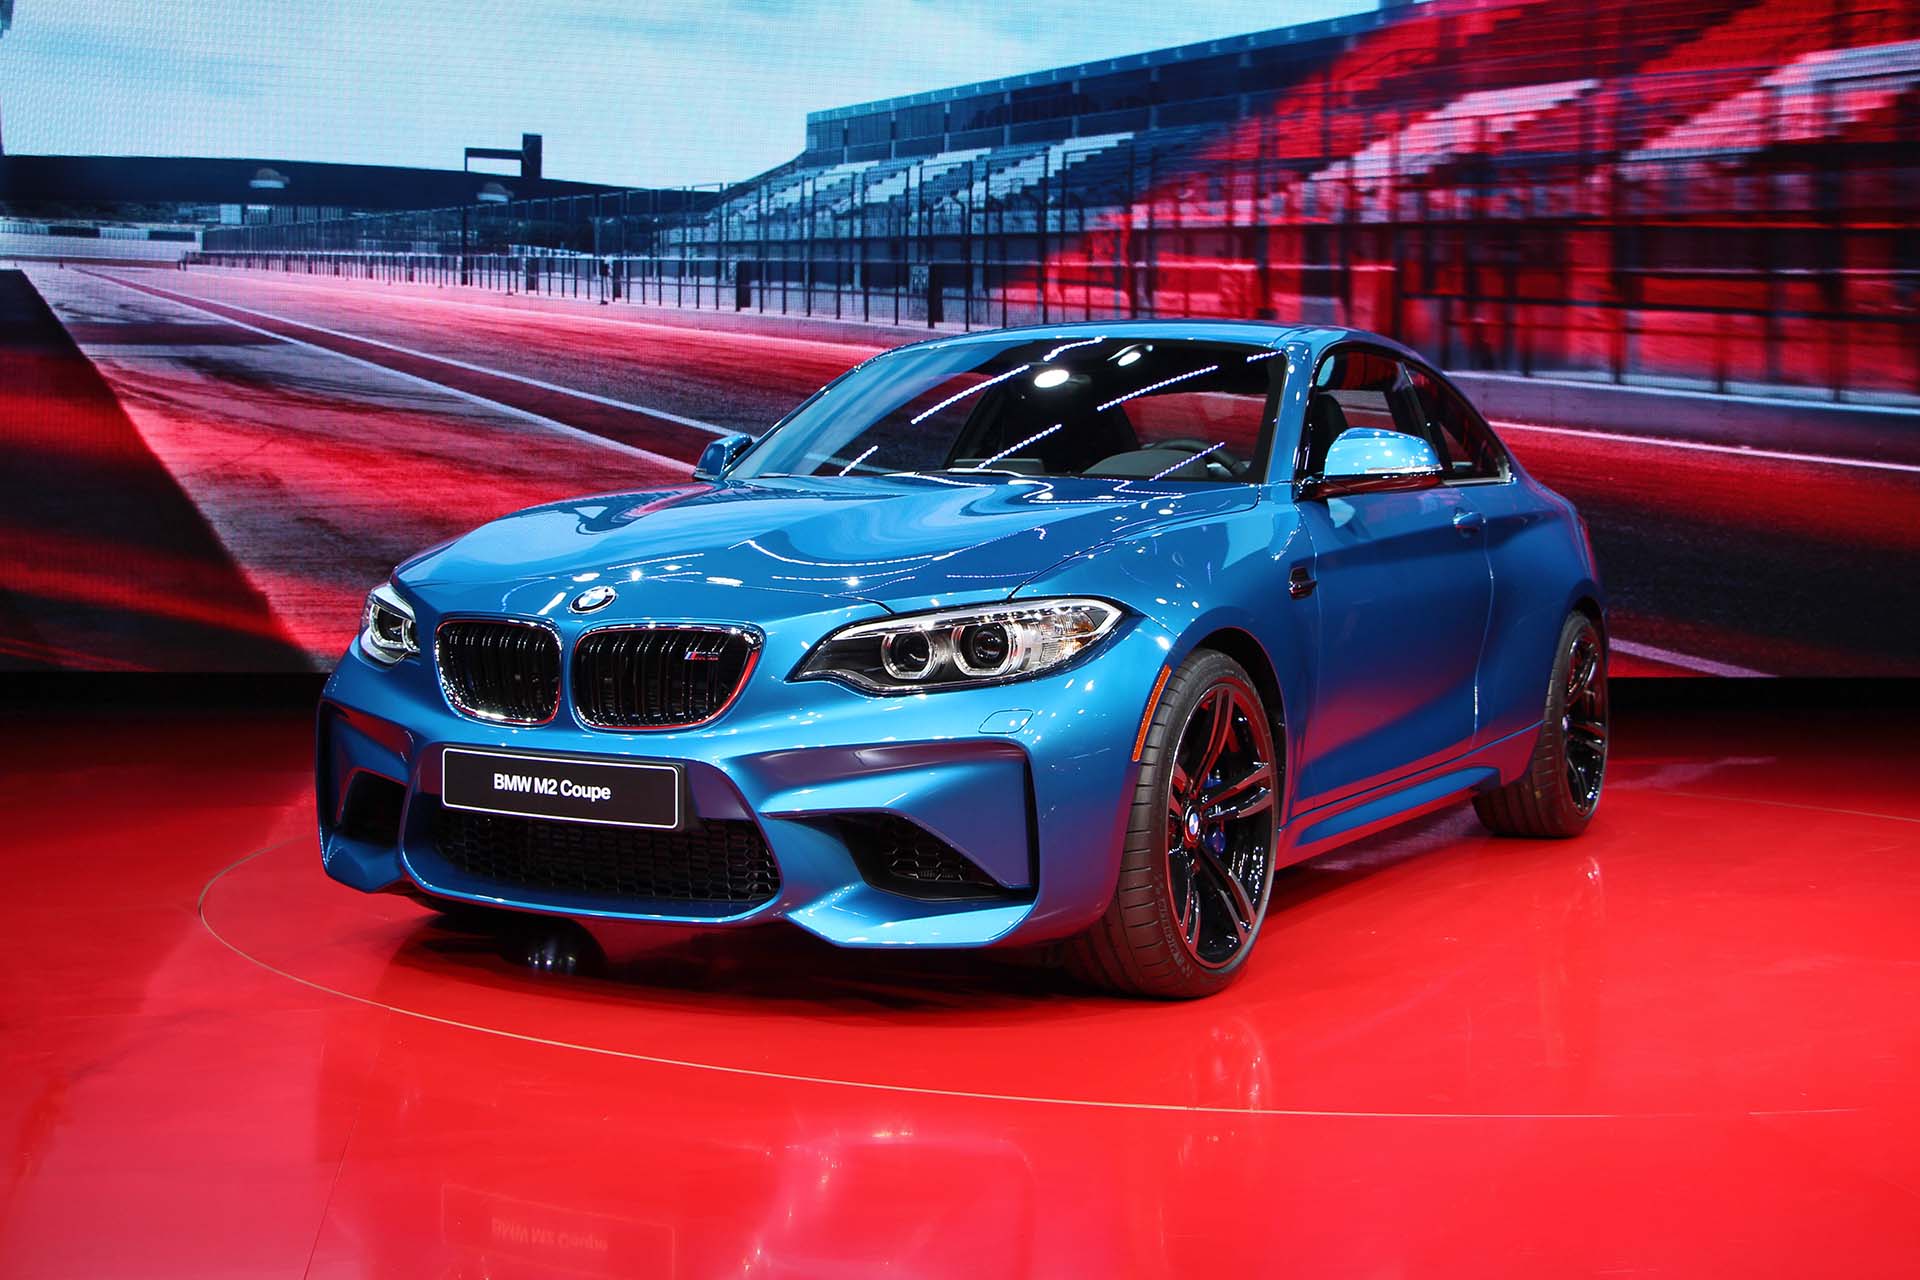 But we promised you the hotness, and here it is: the BMW M2 Coupe – rear-wheel drive, manual transmission, 365 horses. "New king of the pocket rockets?" editor Jonathan Yarkony asks. We say yes.